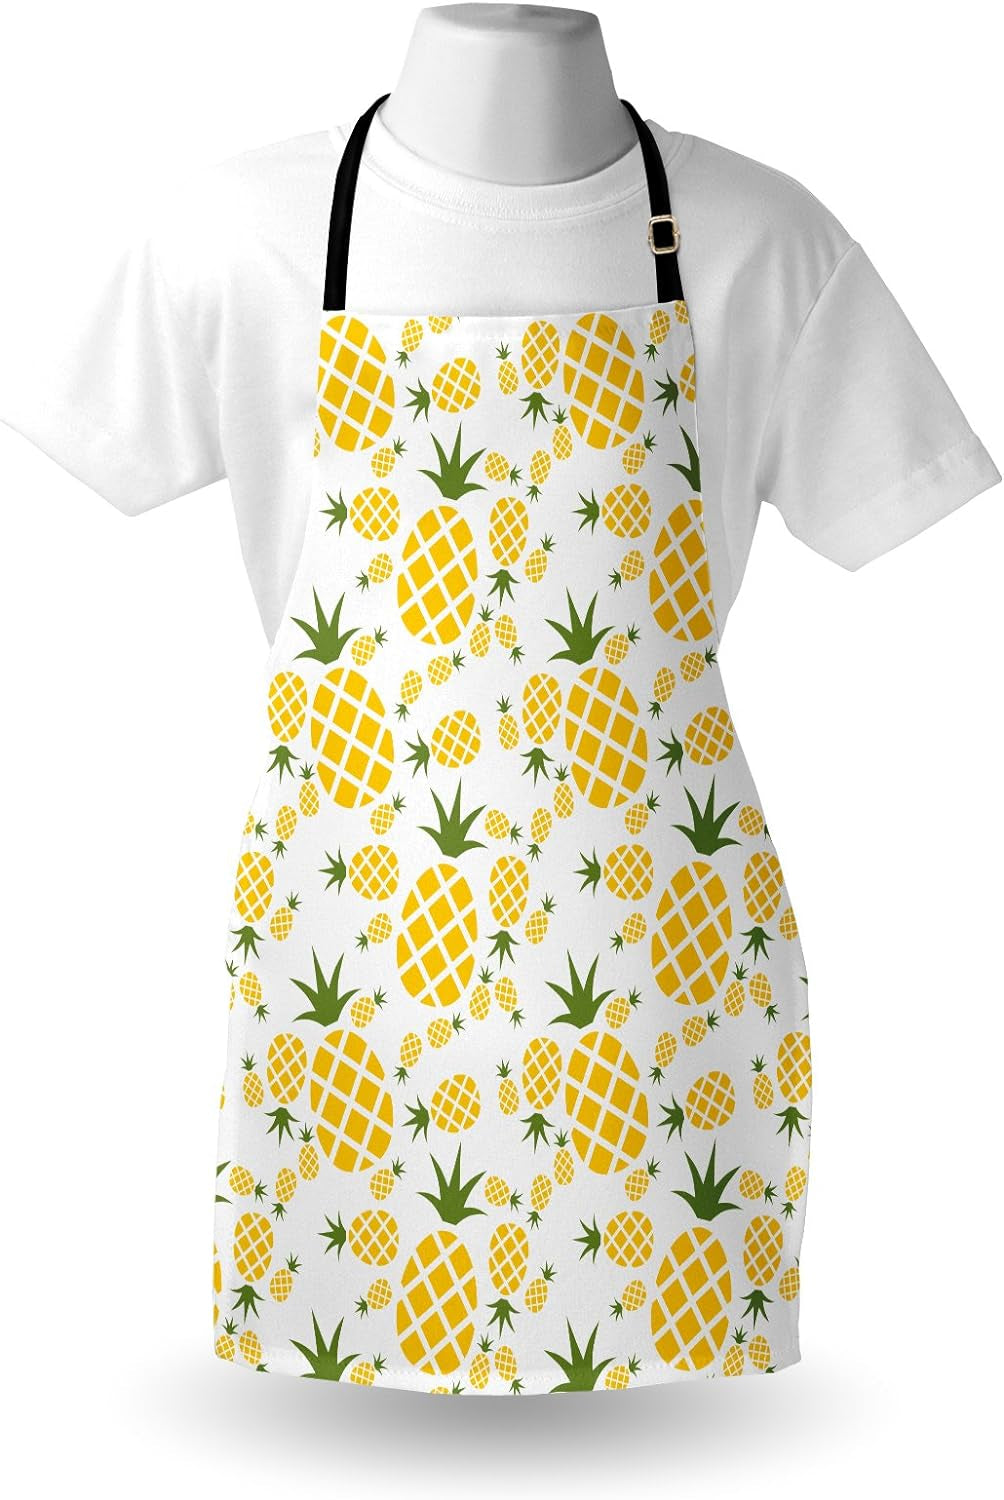 Pineapple Apron with Adjustable Neck for Cooking, Adult Size